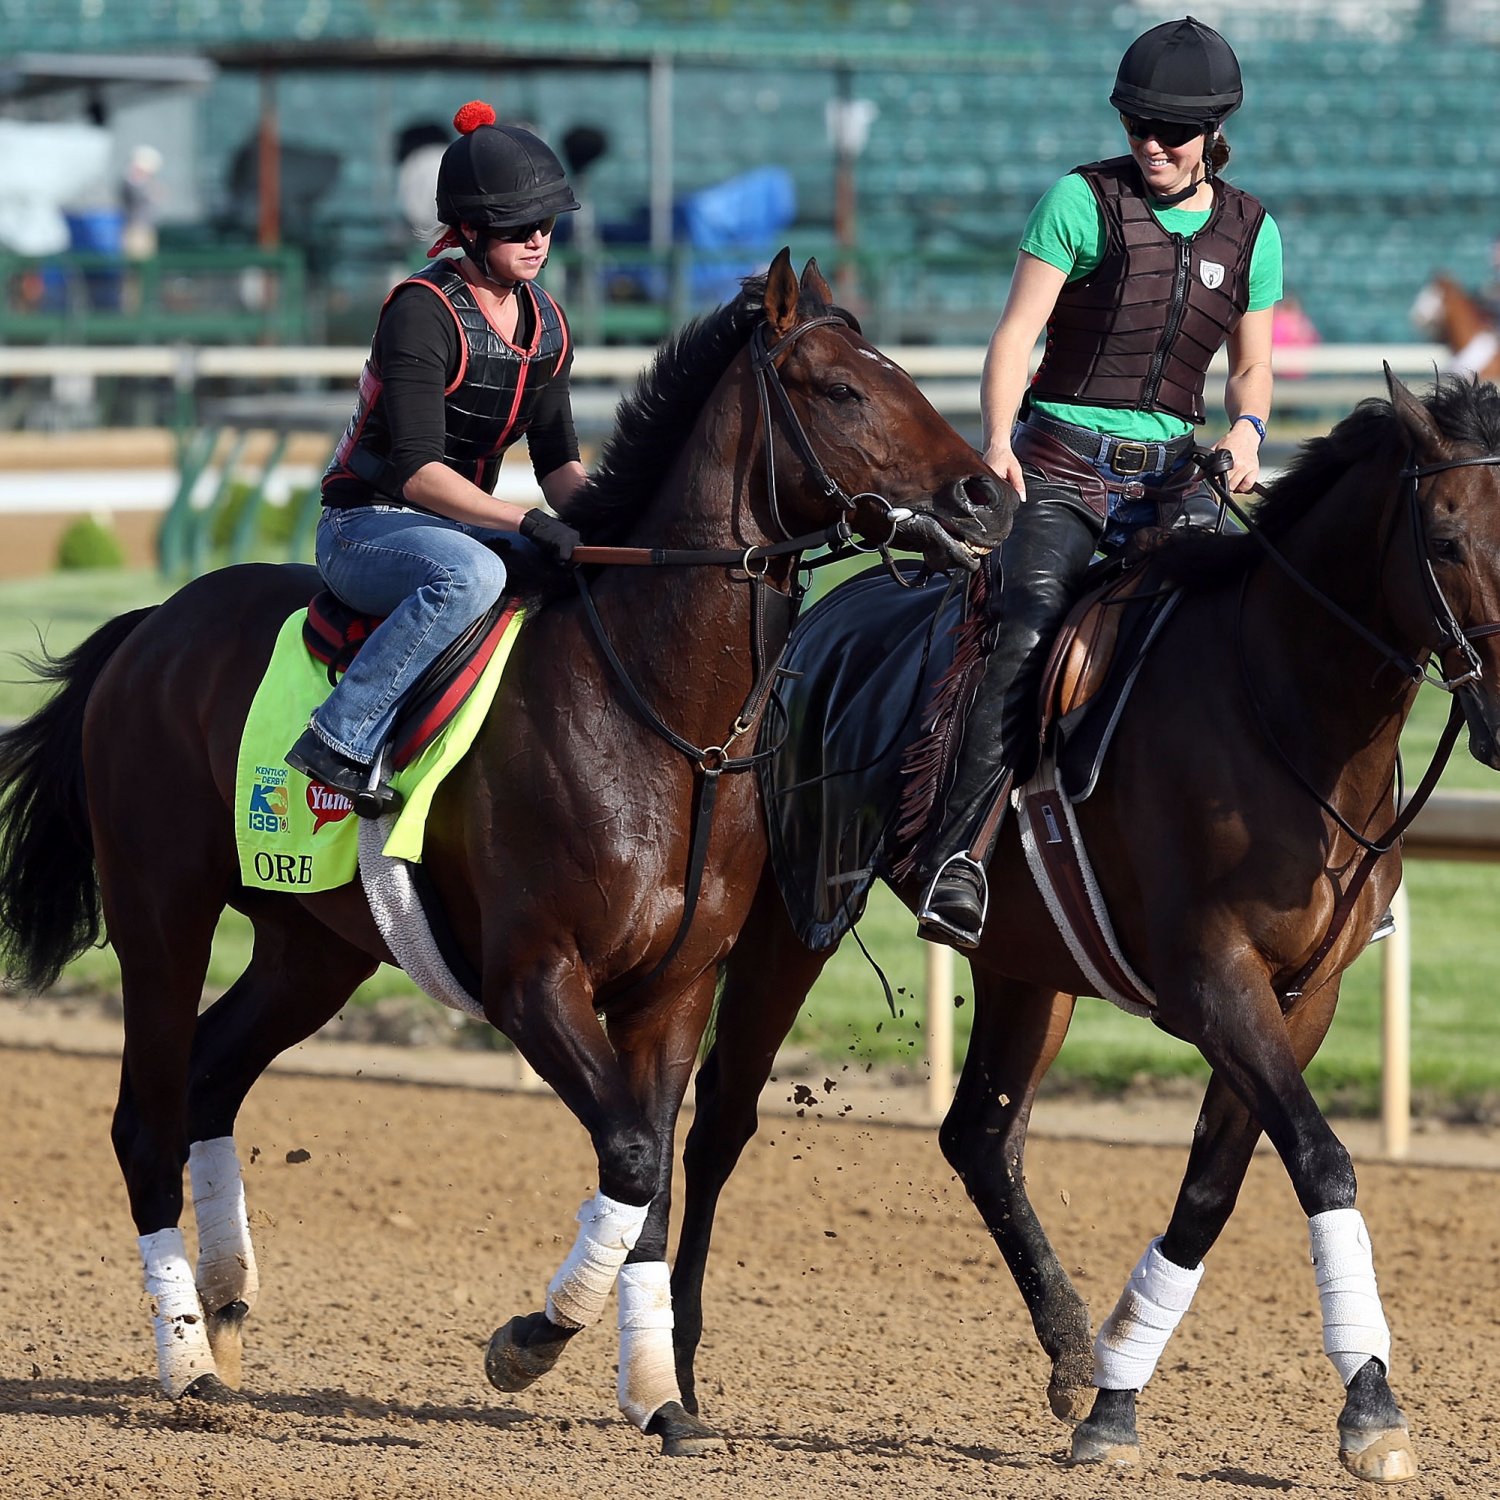 Kentucky Derby 2013 Current Betting Odds from Favorites to Longshots